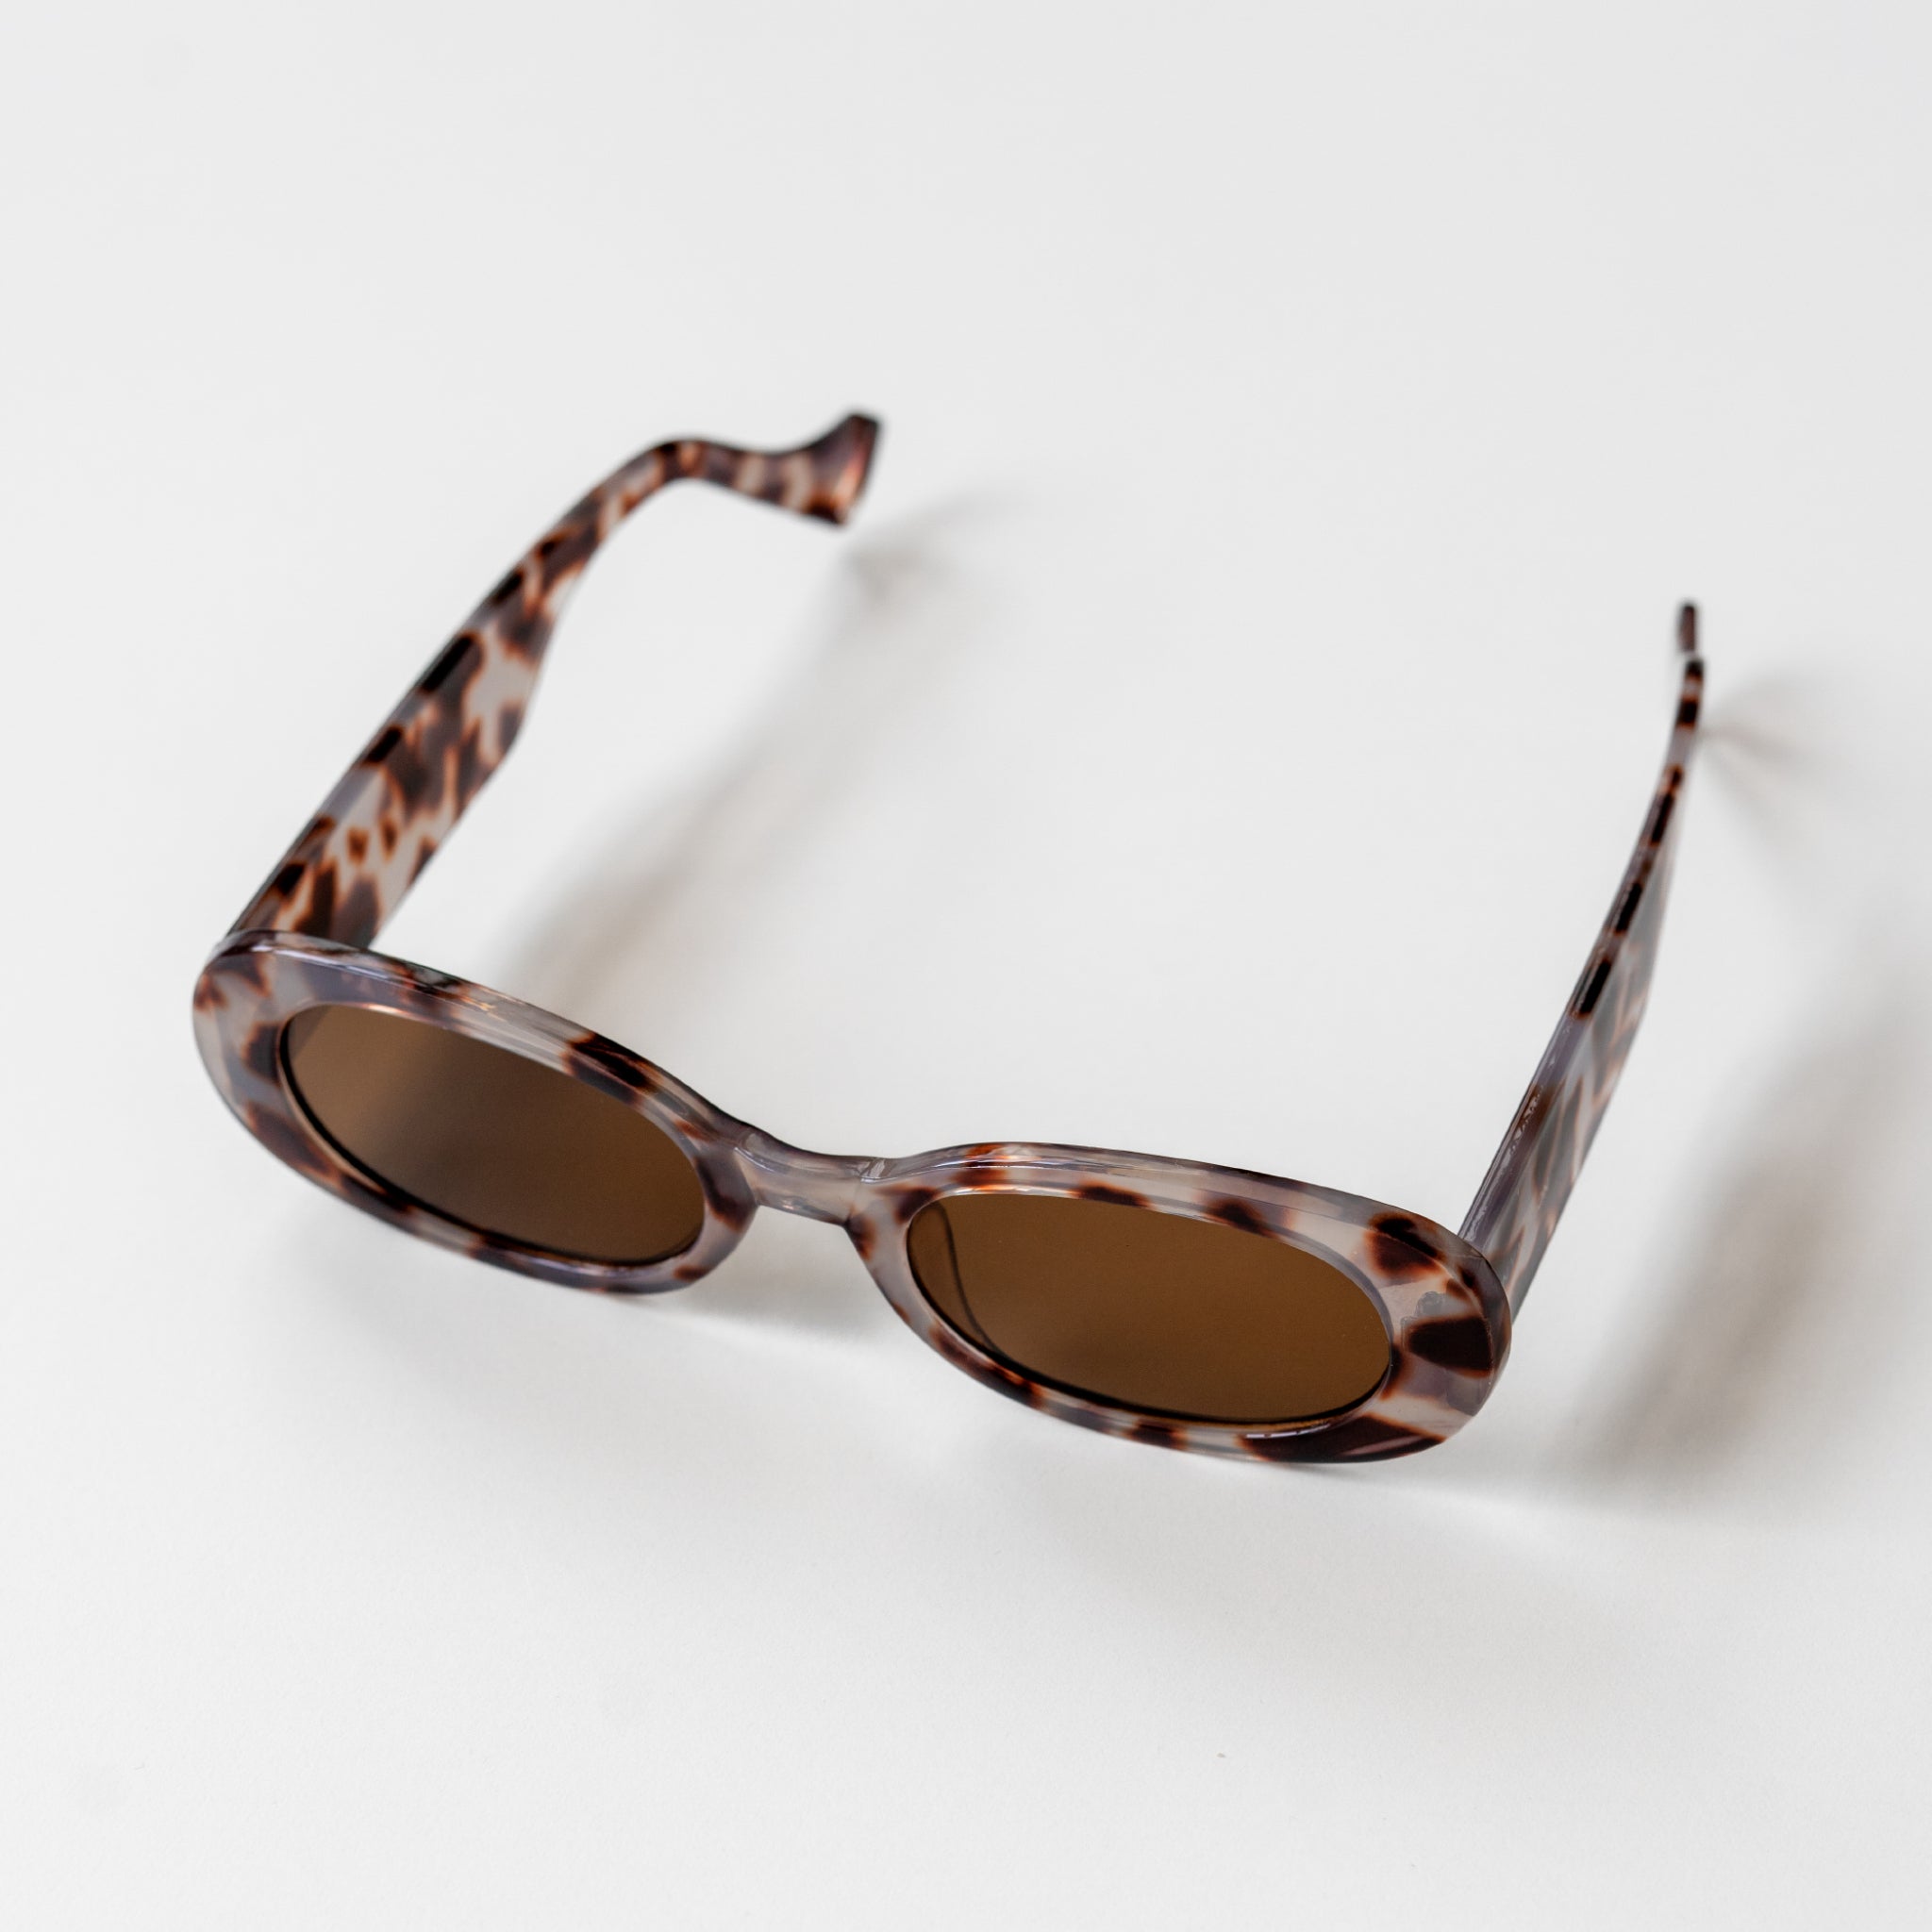 On Vacation Retro Sonnenbrille "Oval"